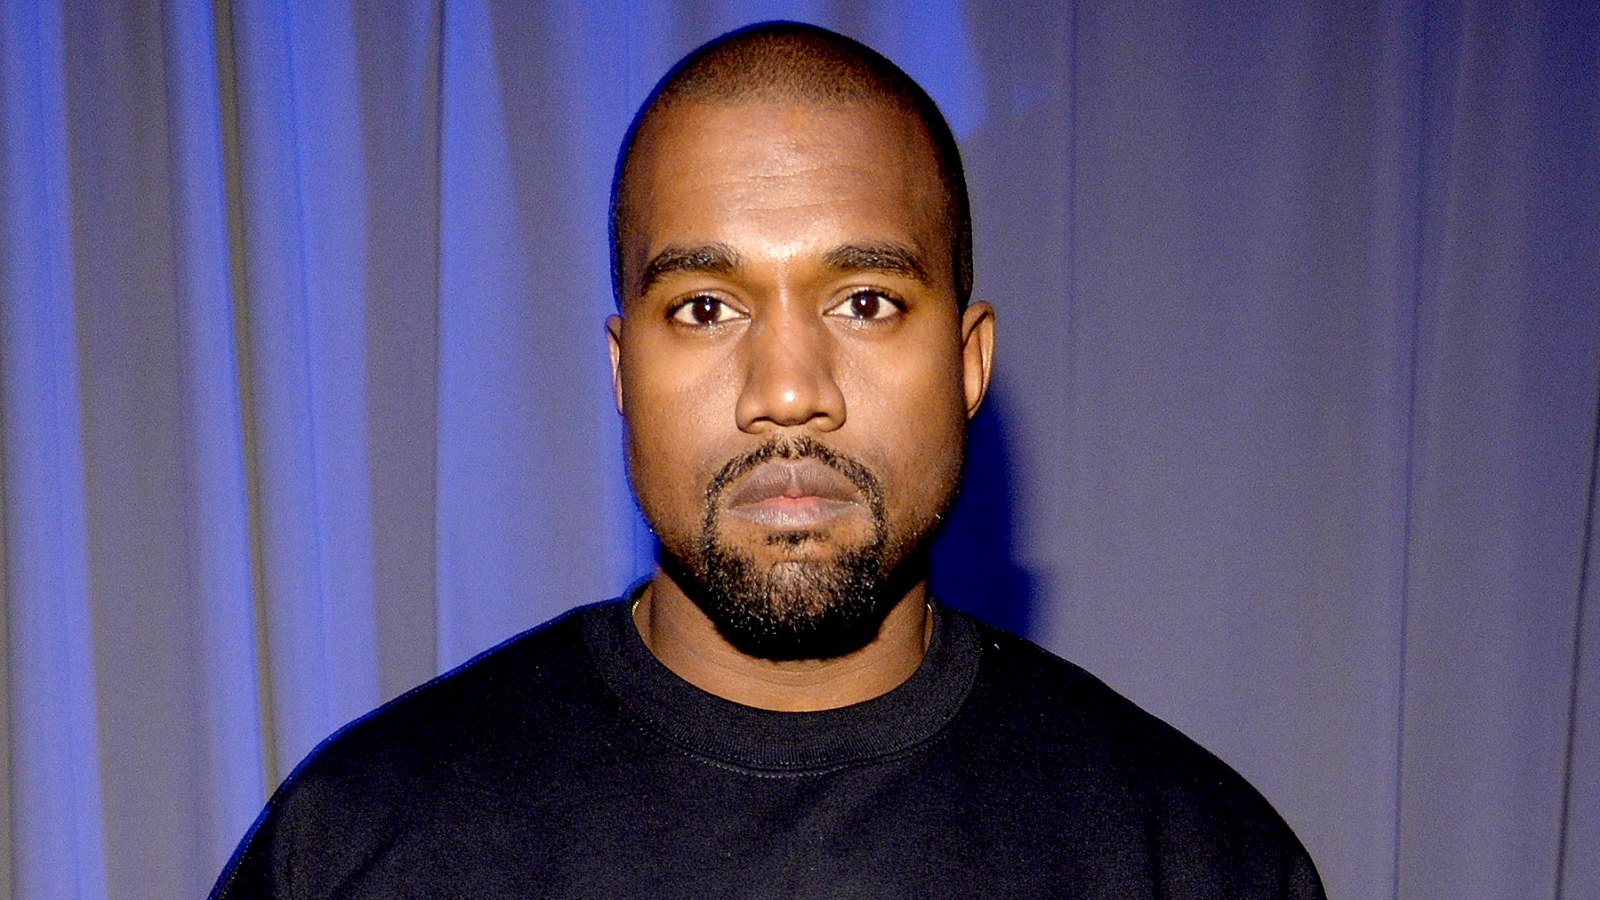 Kanye West attends the Tidal launch event #TIDALforALL at Skylight at Moynihan Station on March 30, 2015 in New York City.